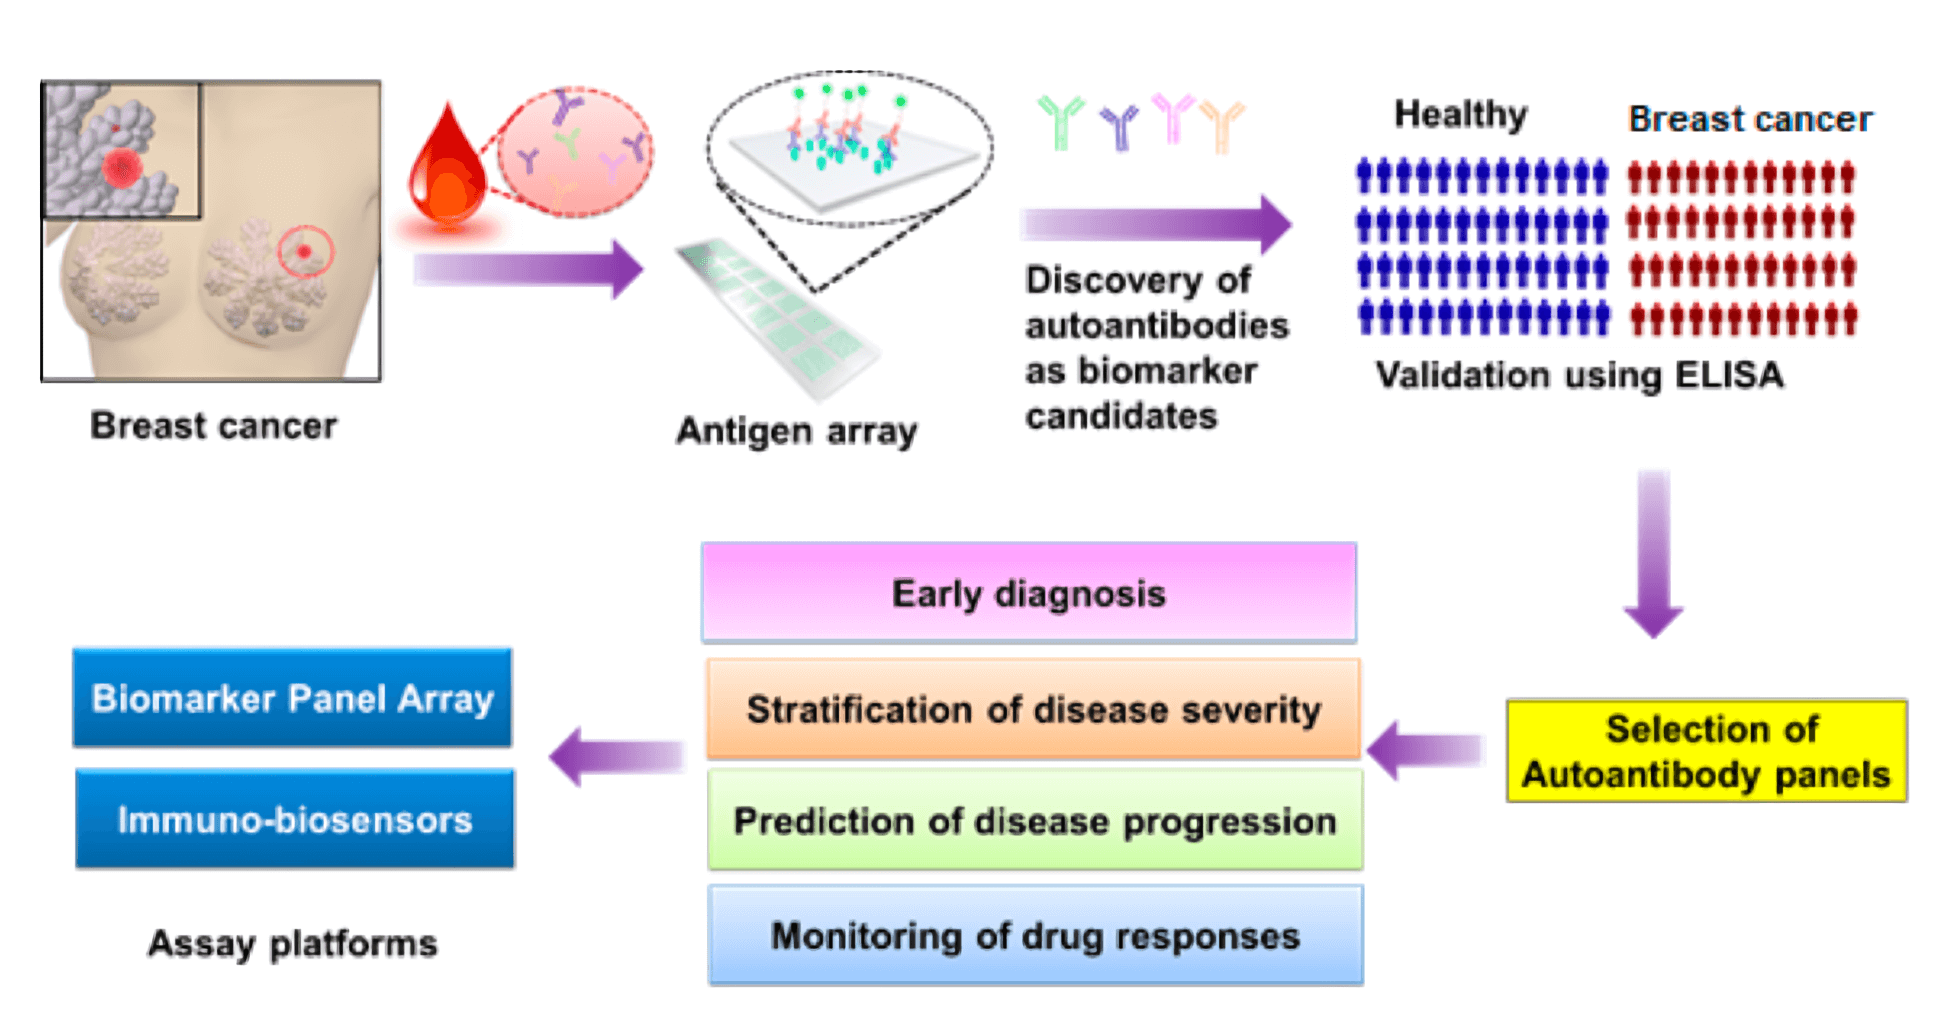 Flowchart of autoantibody biomarker discovery and detection in breast cancer using antigen arrays and ELISA.